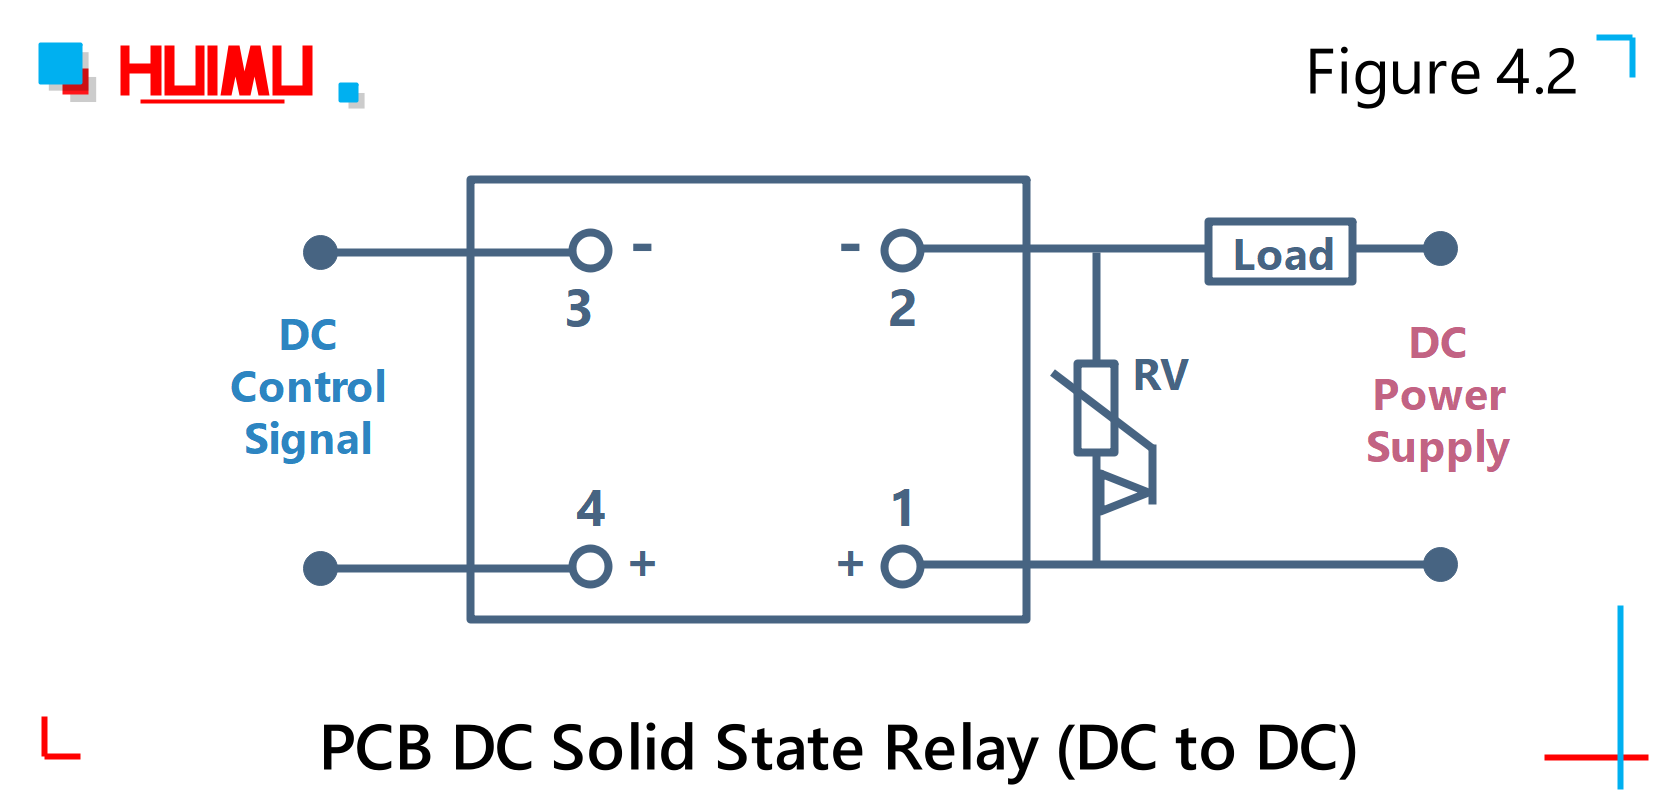 PCB DC solid state relay (DC to DC) wiring diagram and circuit diagram Type 2